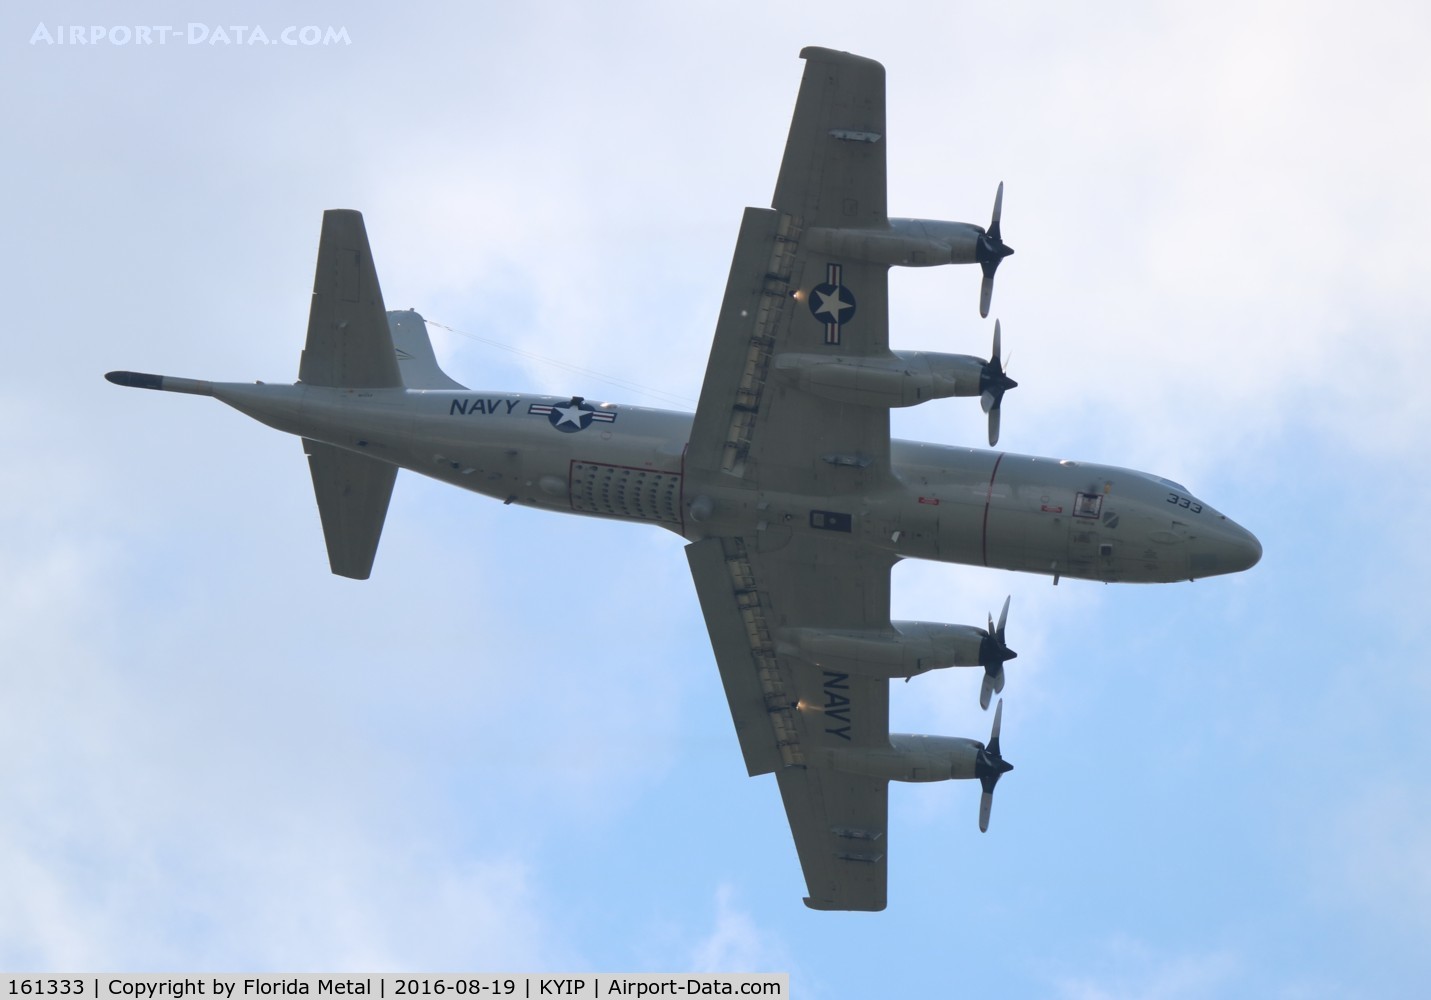 161333, 1981 Lockheed P-3C AIP+ Orion C/N 5730, Thunder Over Michigan 2016 zx